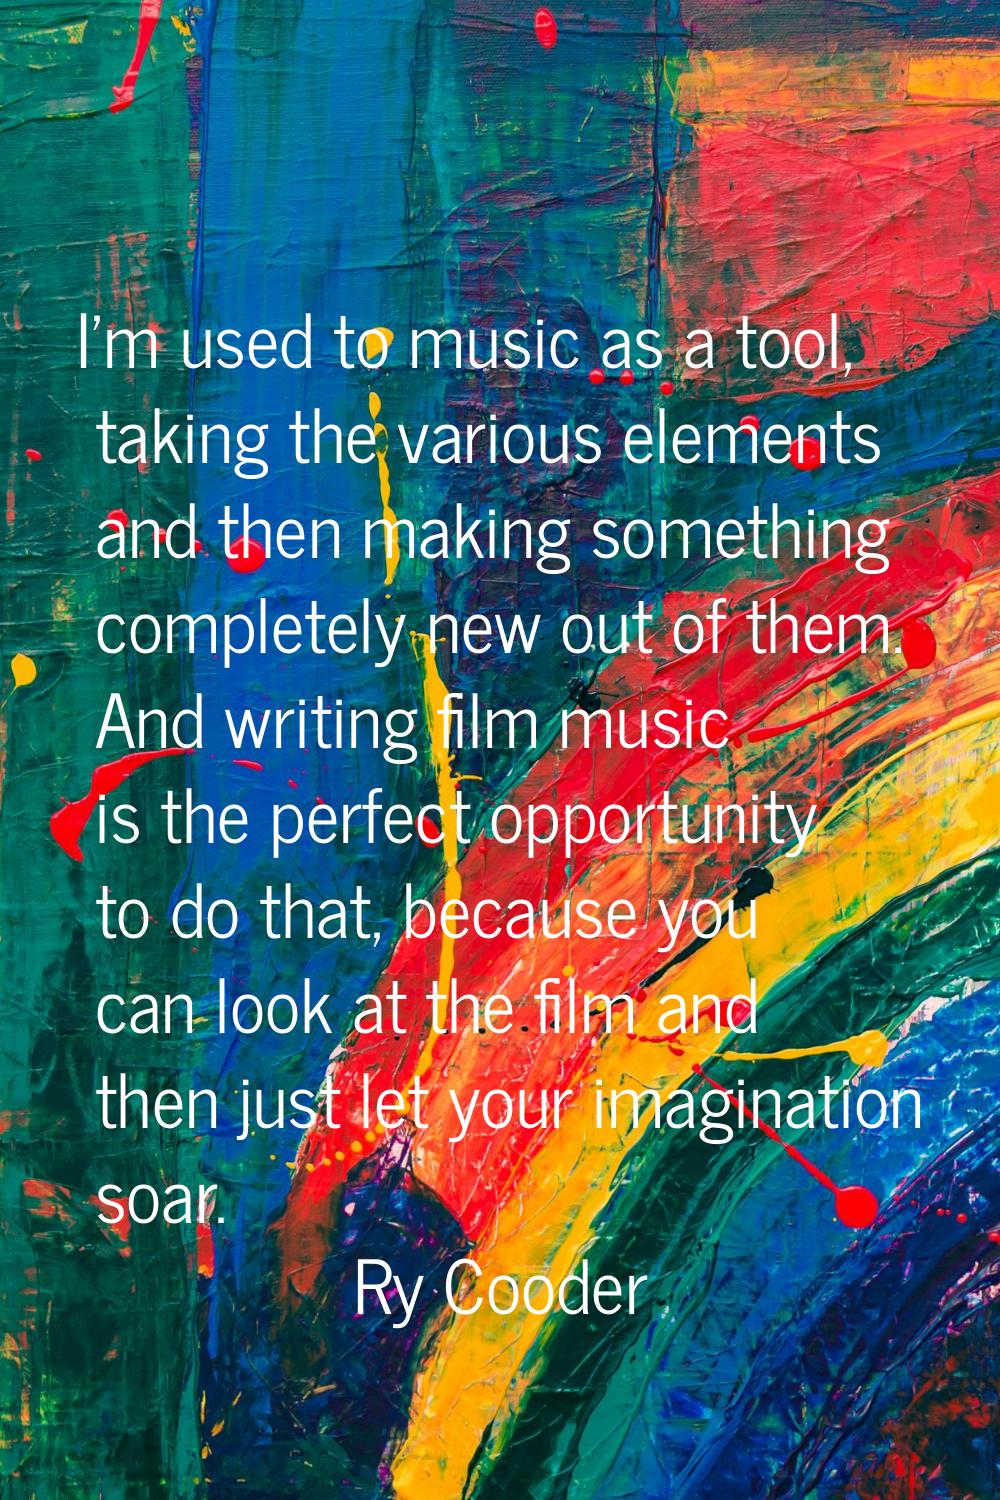 I'm used to music as a tool, taking the various elements and then making something completely new o